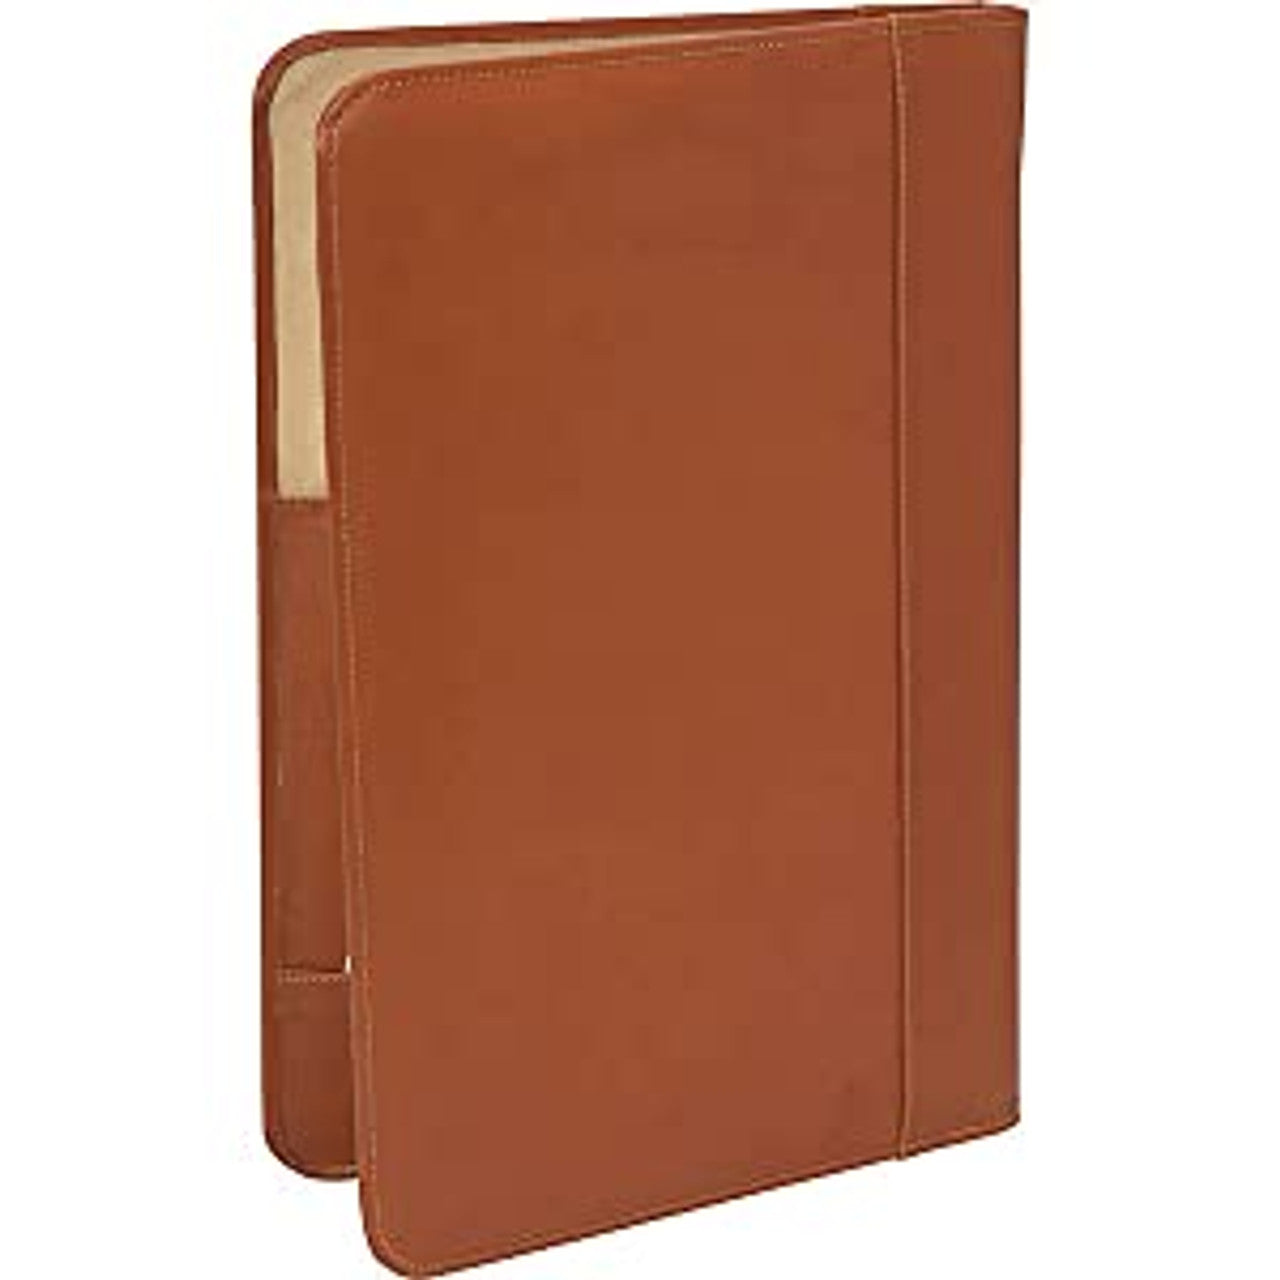 Legal-Size Open Padfolio - Leather Loom